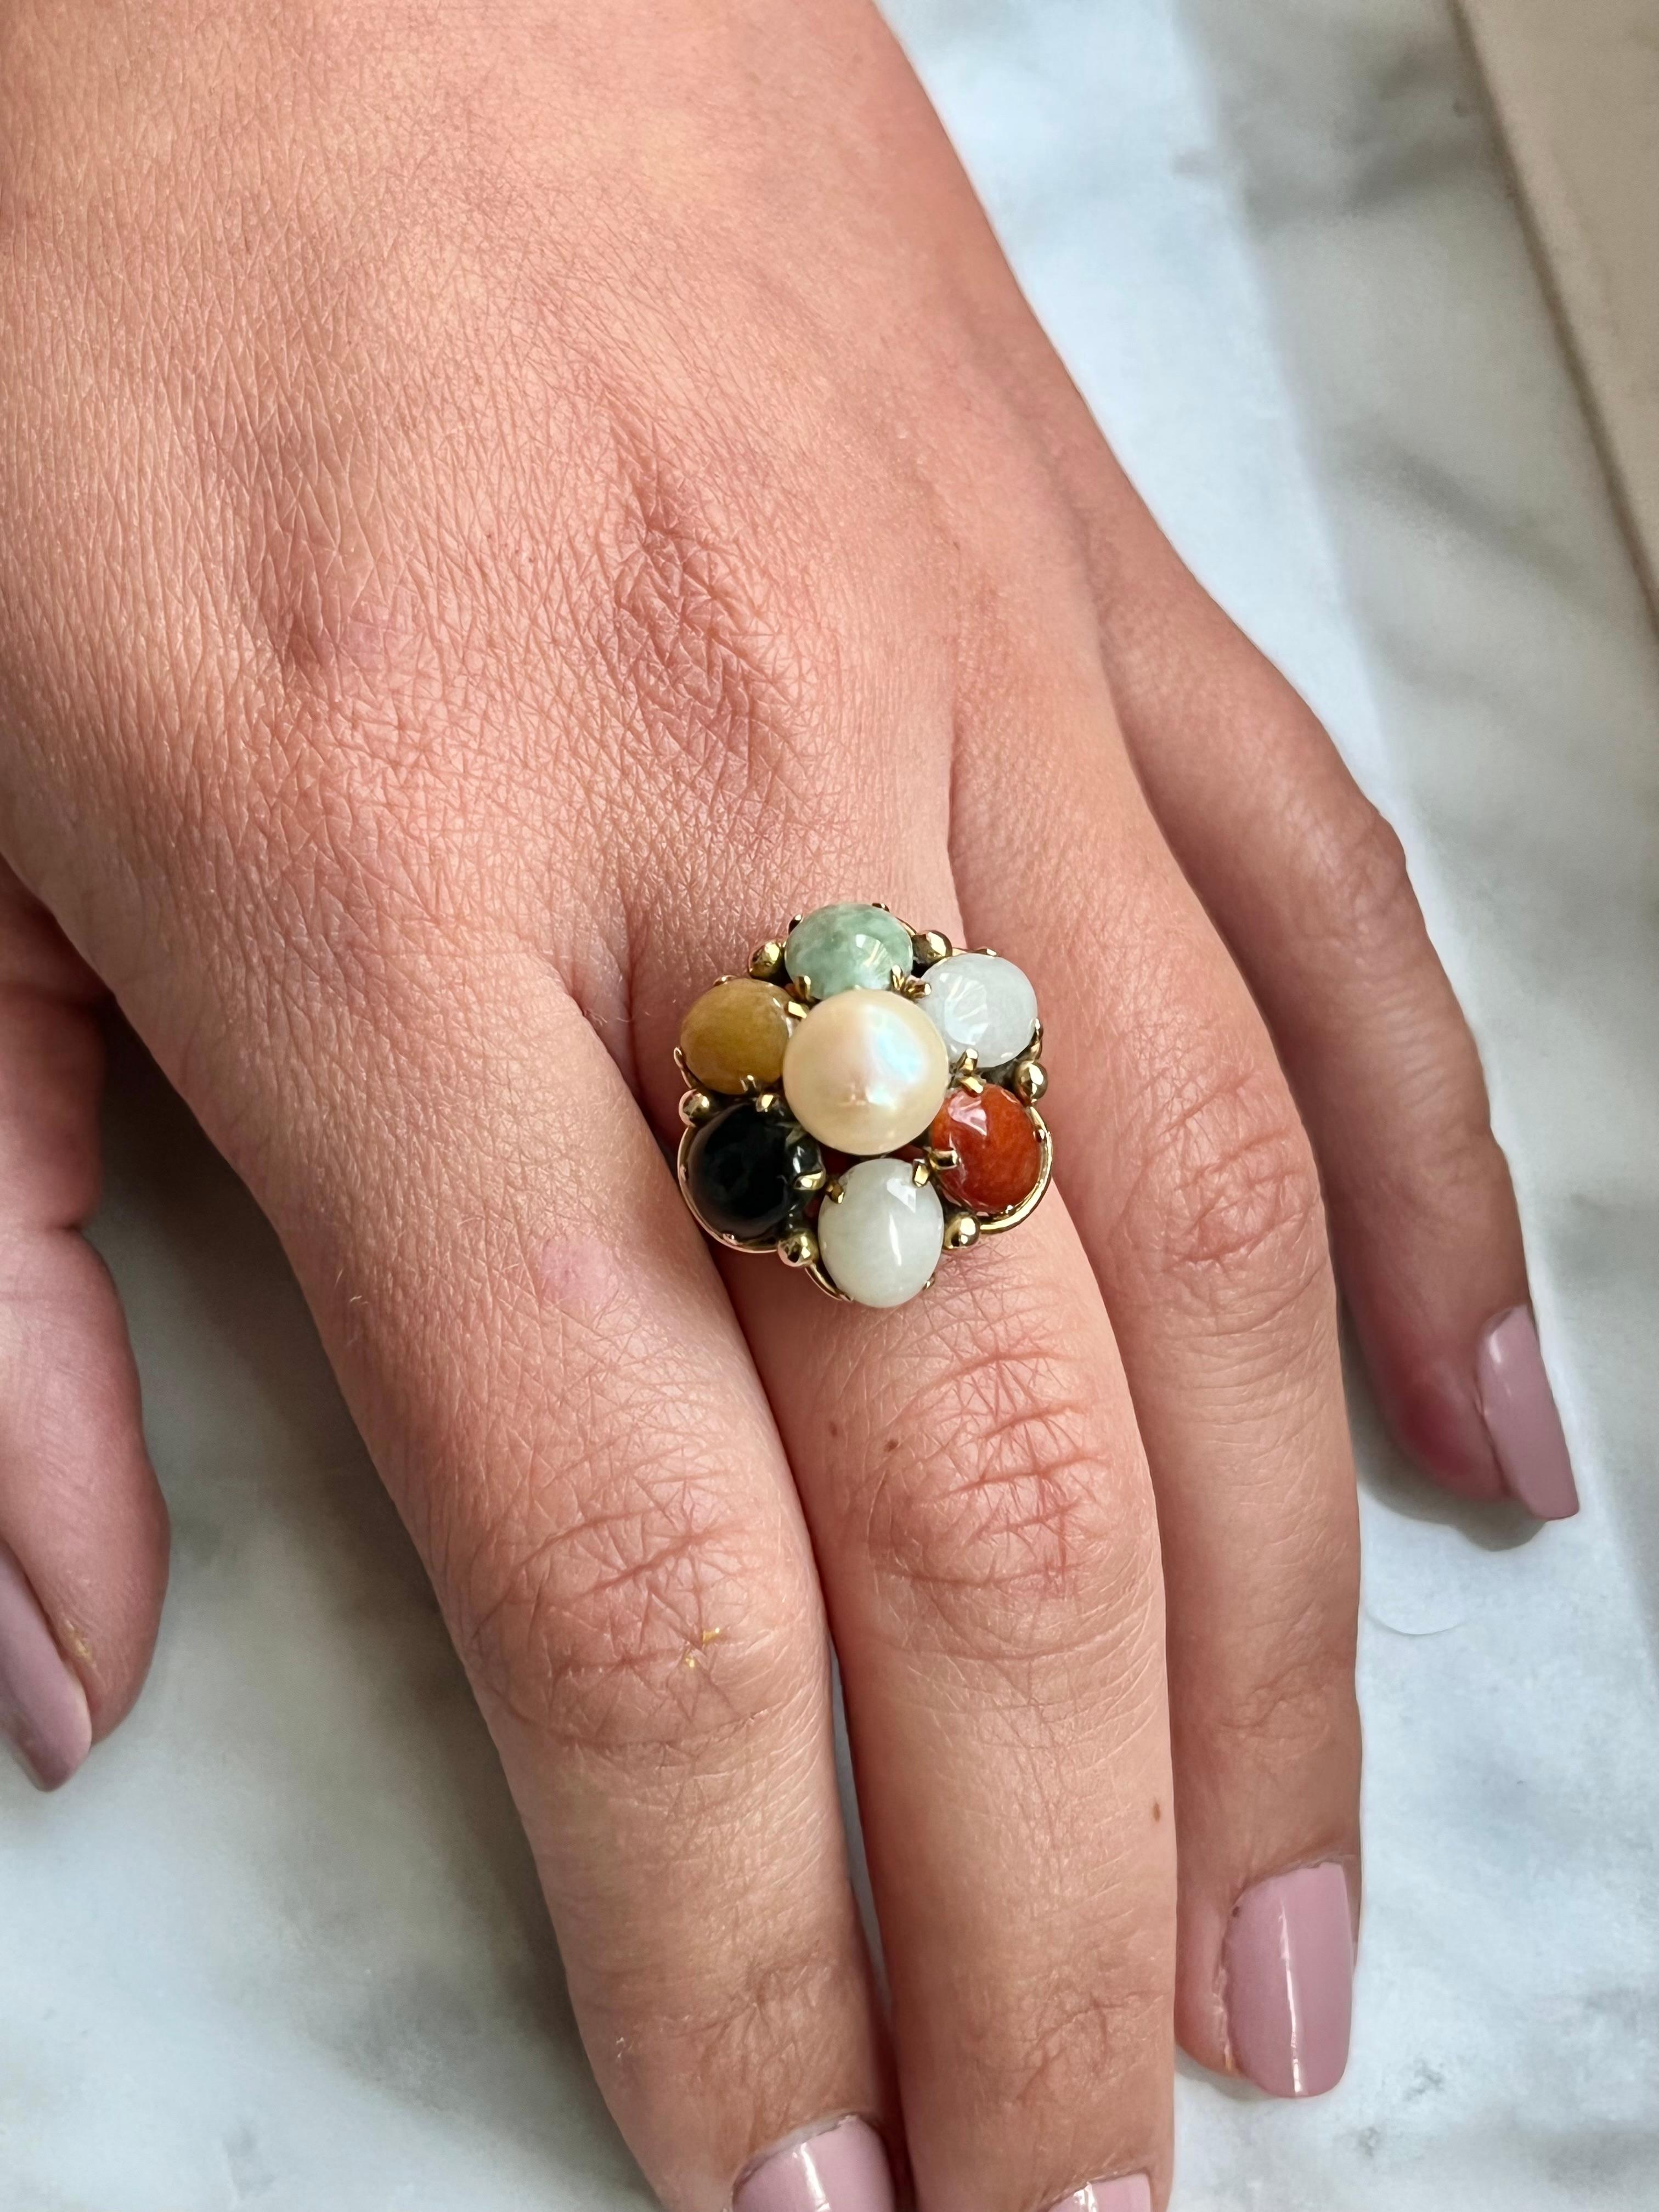 Multi Gem Flower Cluster Ring with Cabochon Cut Stones in 14k Gold 2